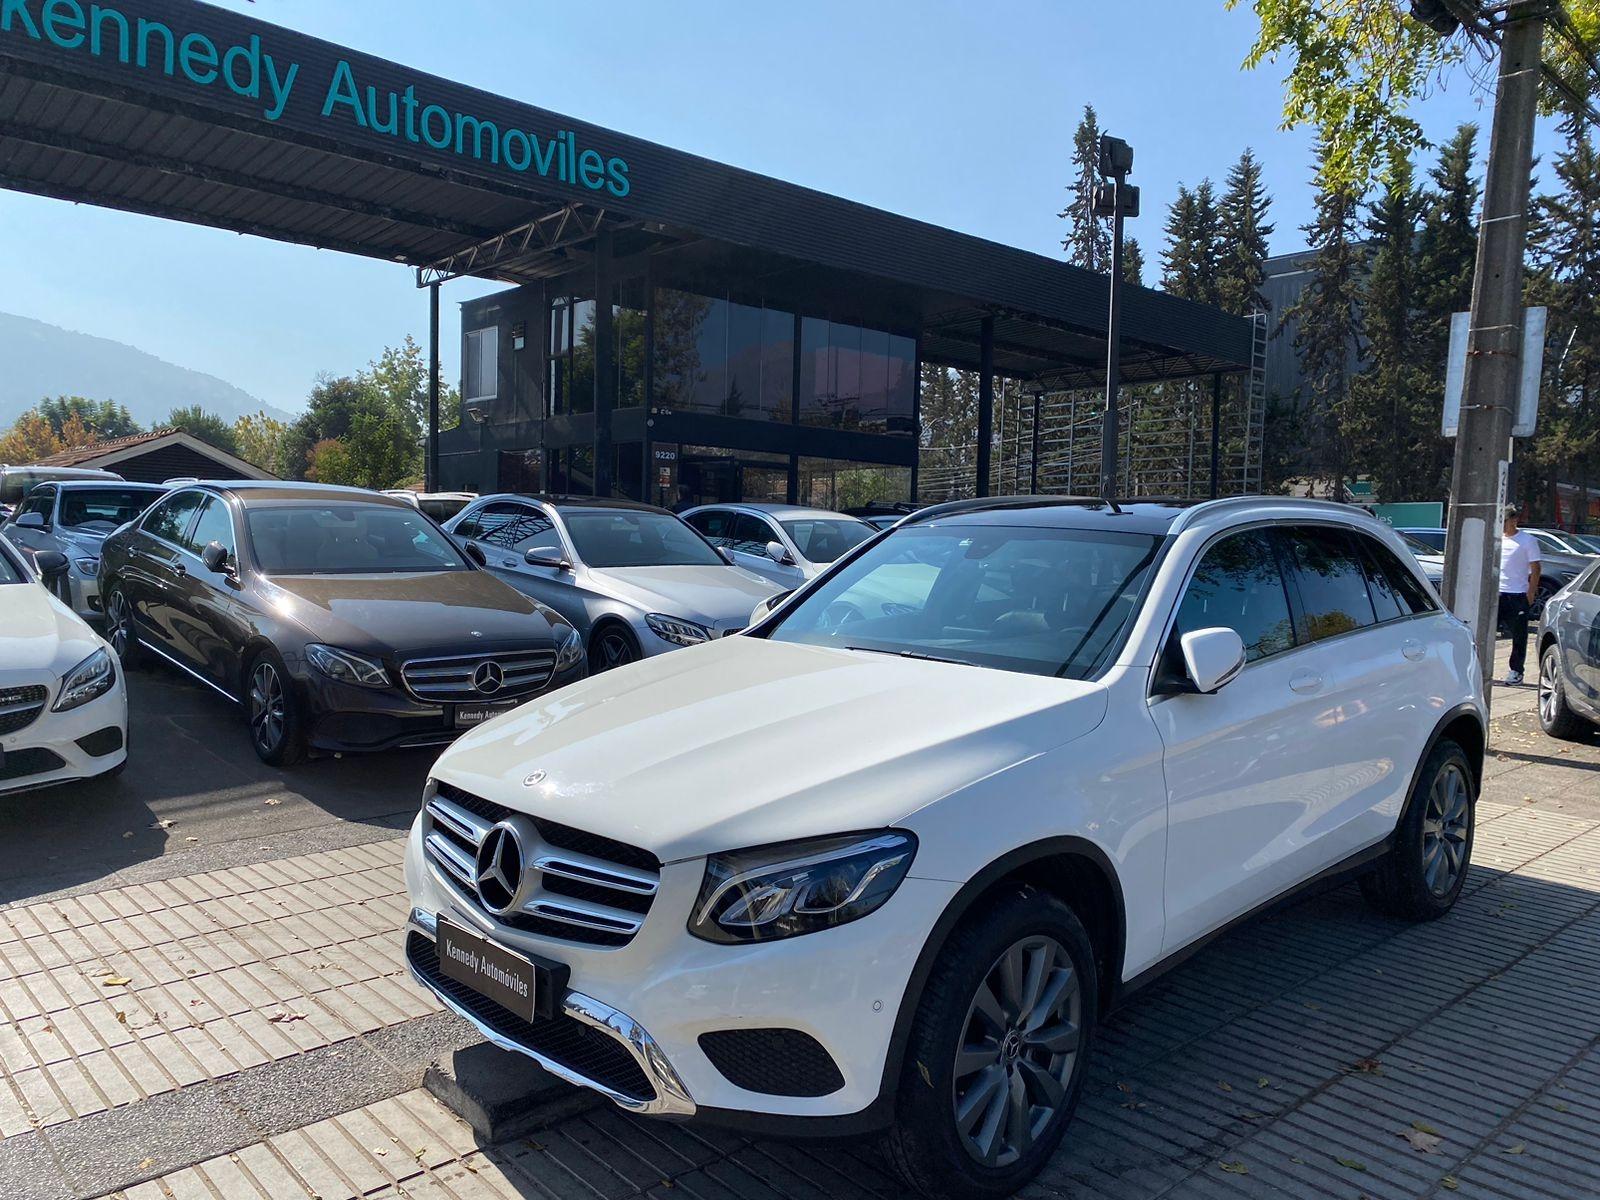 MERCEDES-BENZ GLC 250 2.1 GLC 250D Auto 4Matic 2020 IMPECABLE - KENNEDY AUTOMOVILES